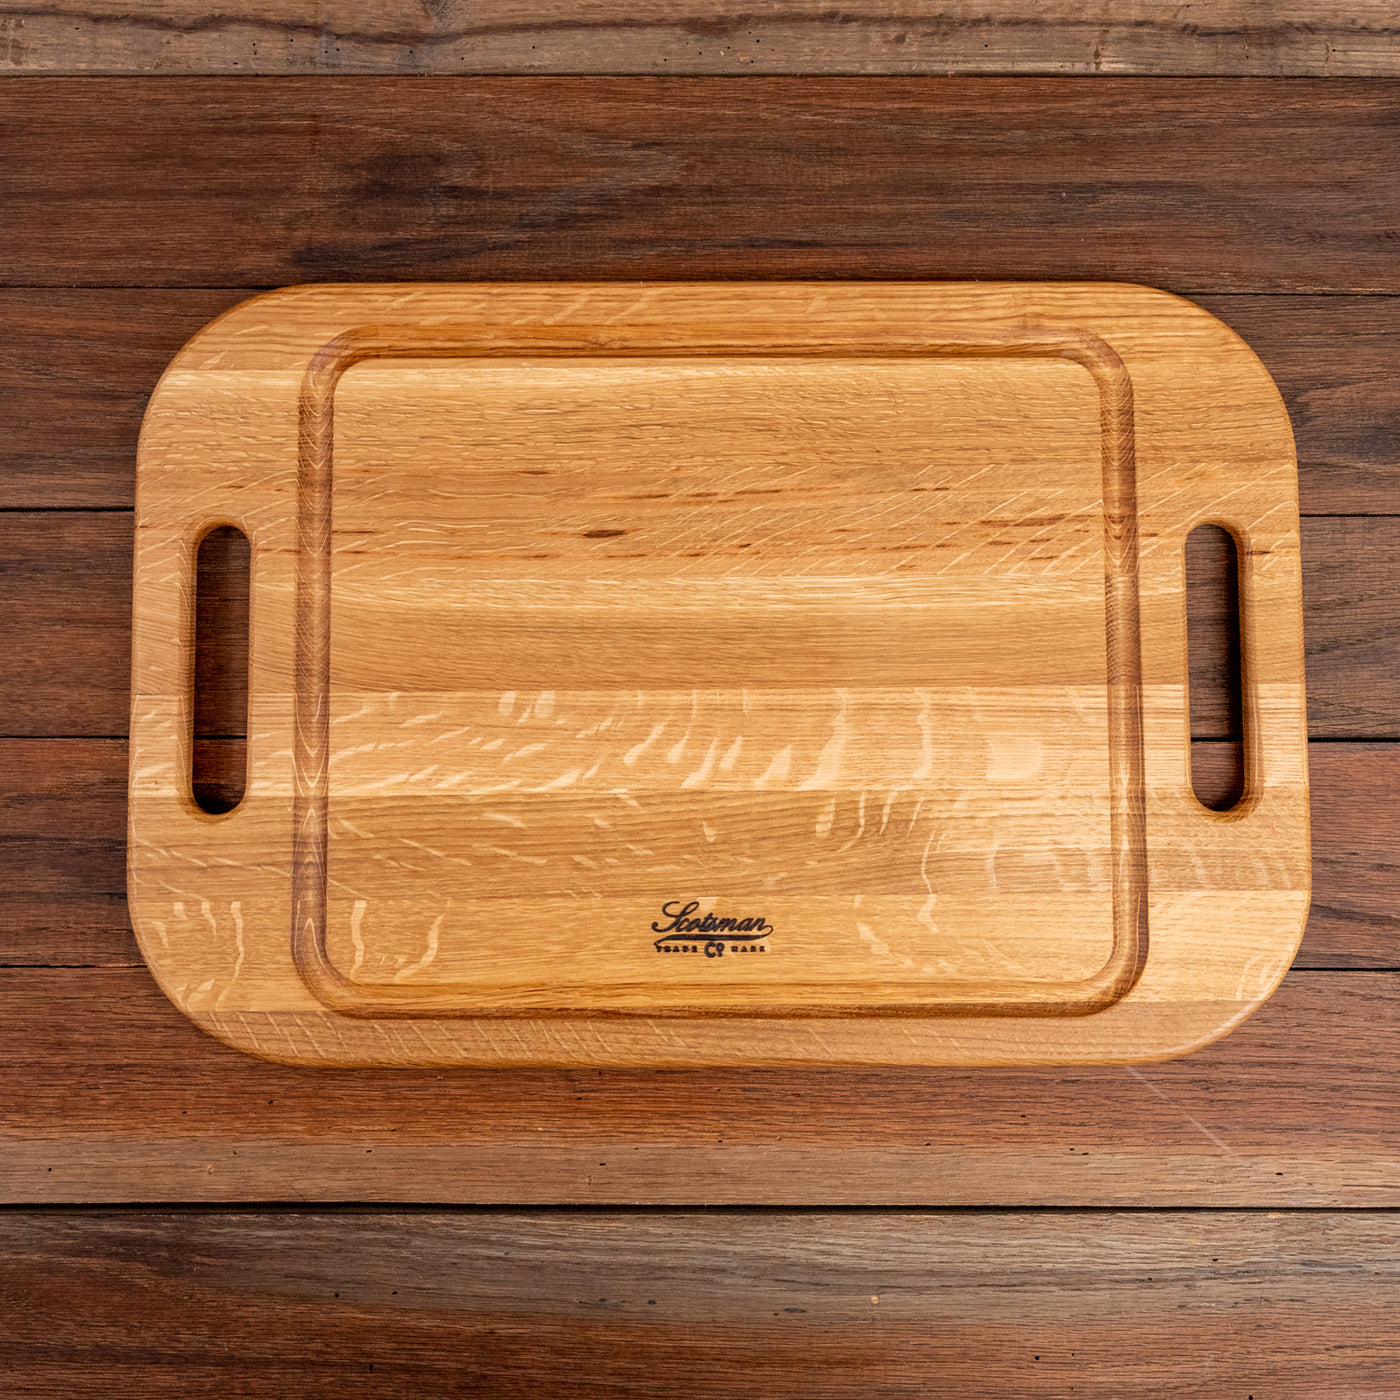 White Oak Grilling Board with Handles